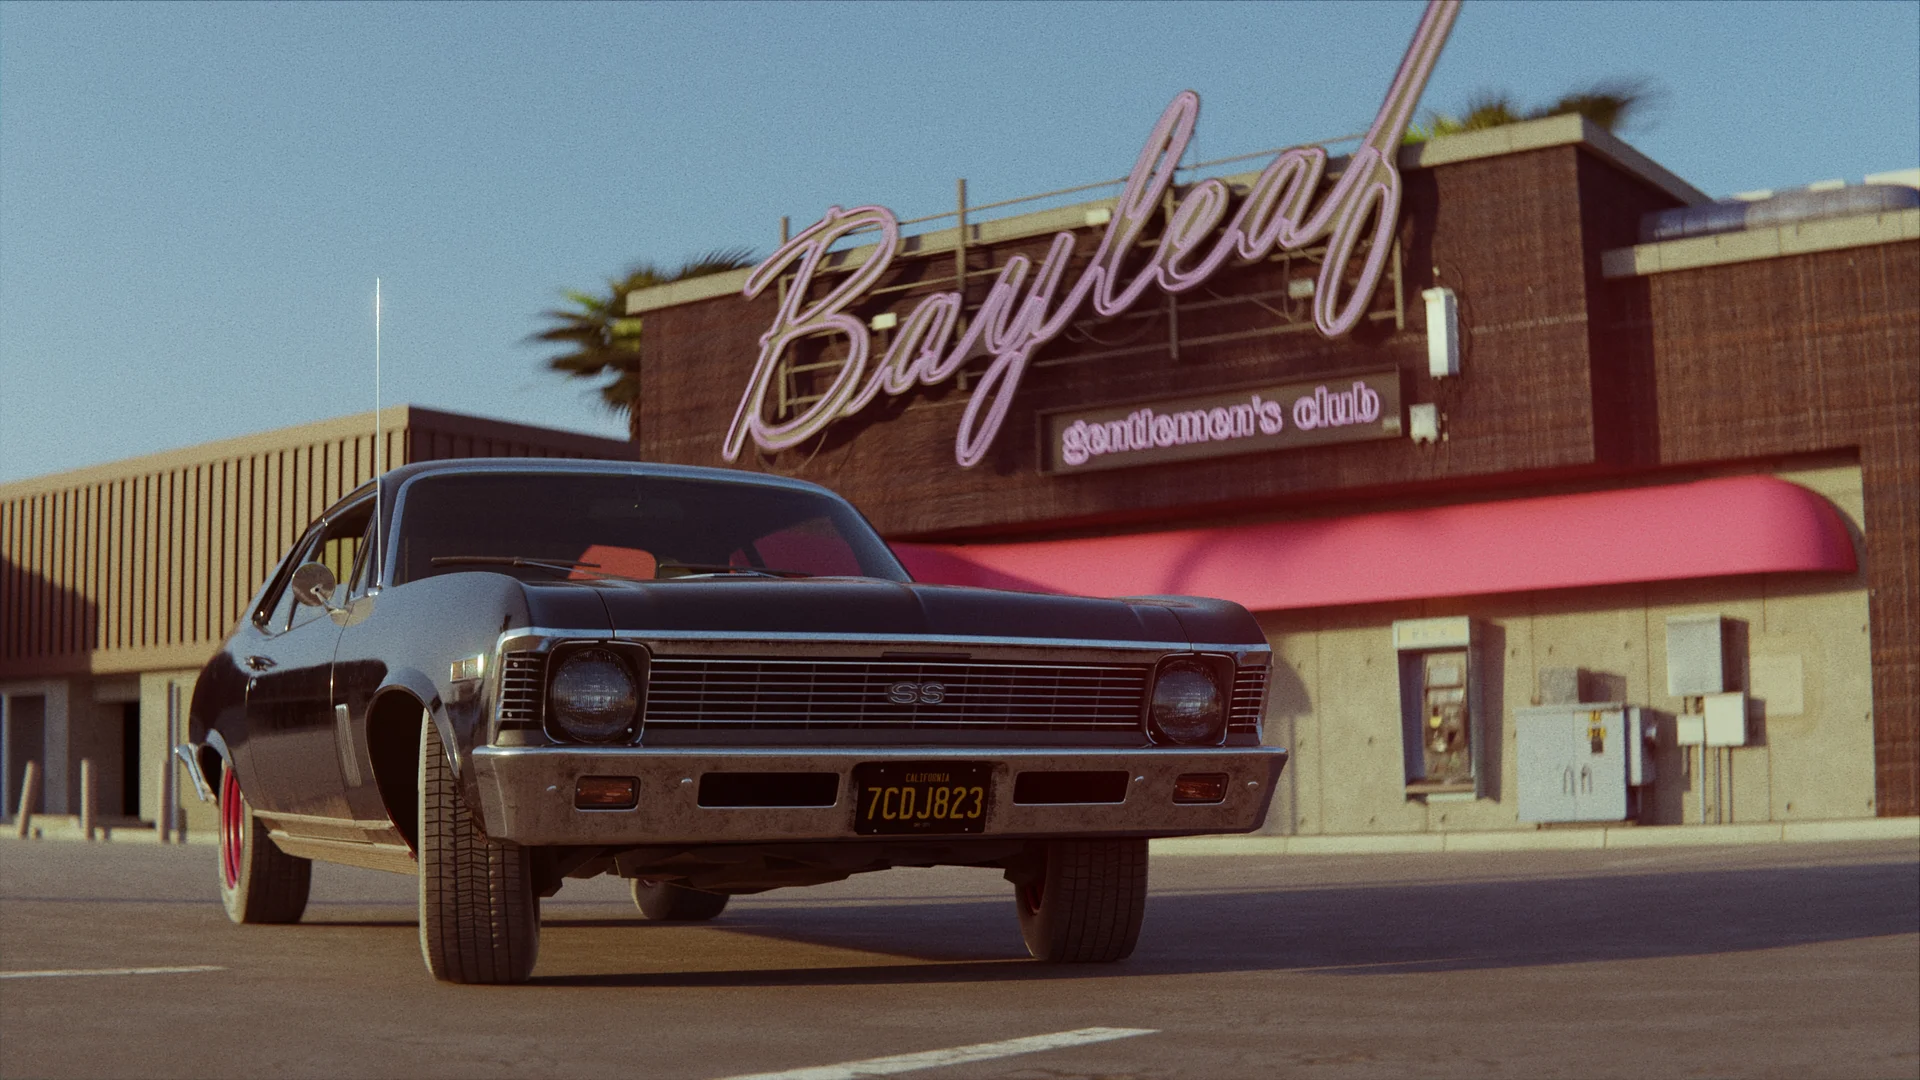 In California sunshine, a 1970 Chevy Nova is parked askew in the lot of a strip club called the Bayleaf, as per the large neon sign overhead.